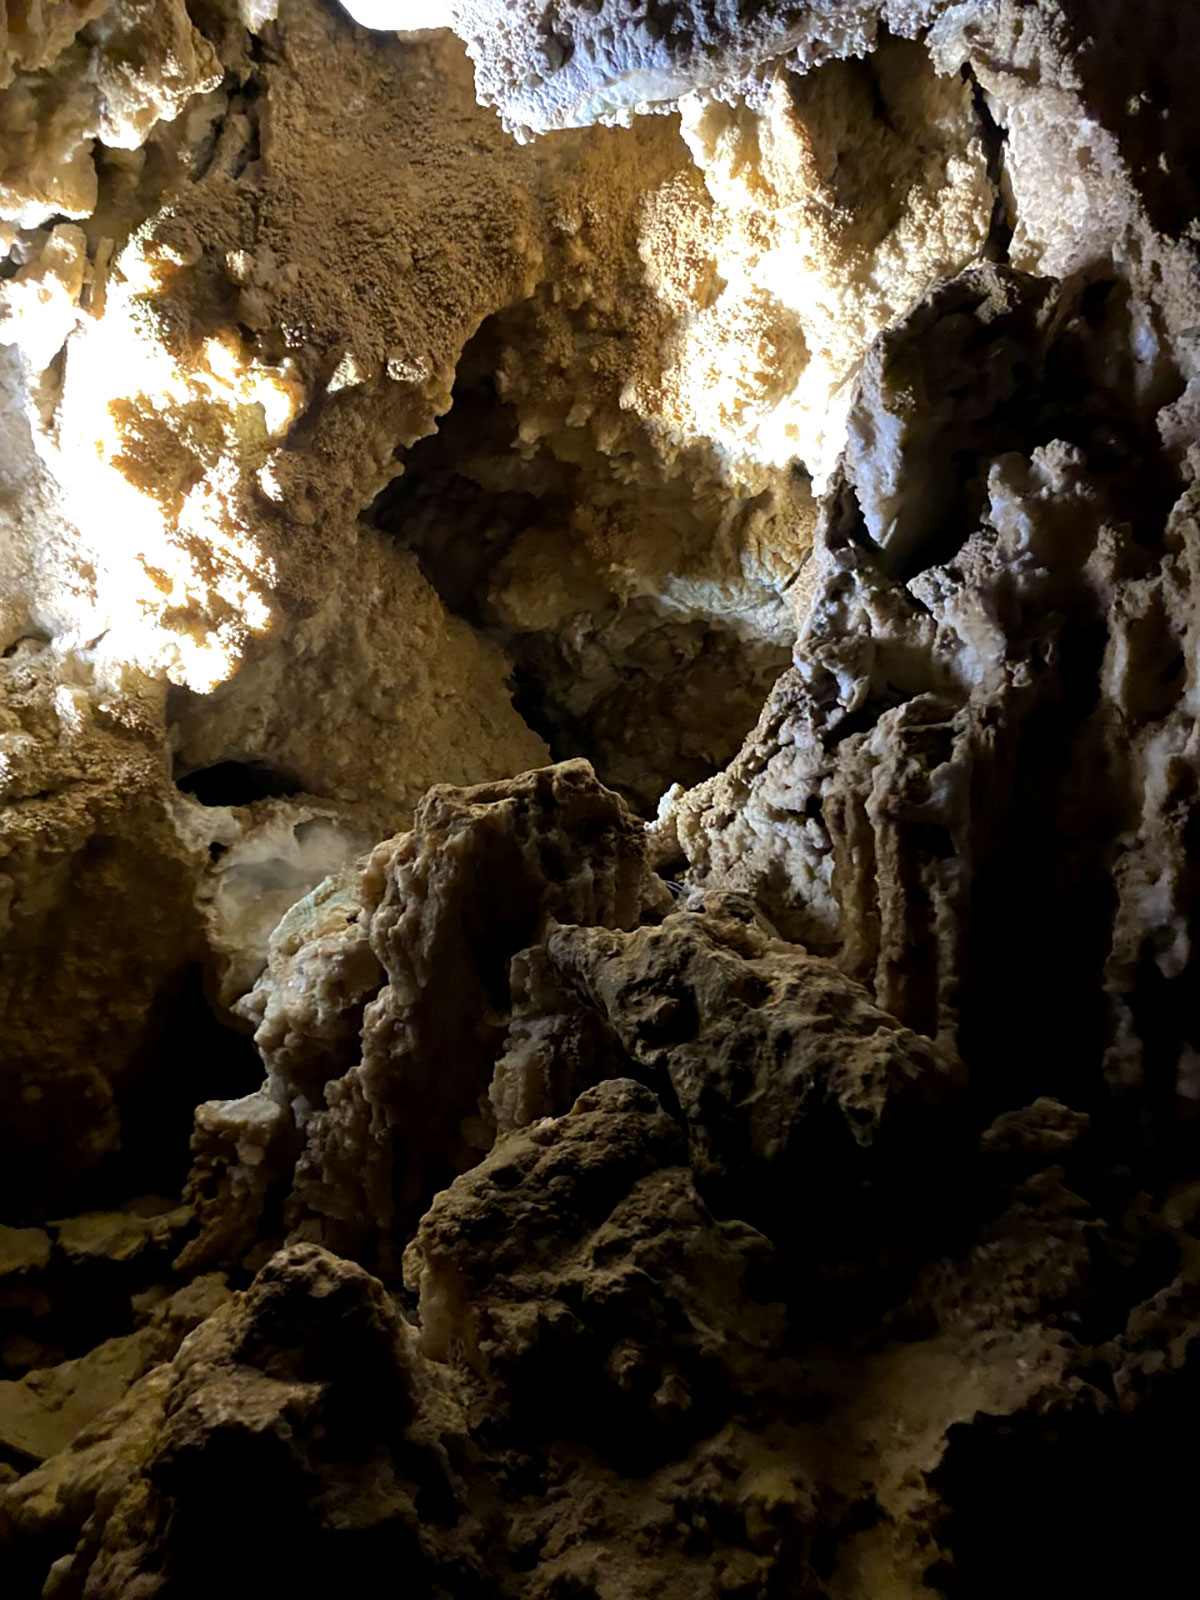 Rock formations reach up to the ceiling.